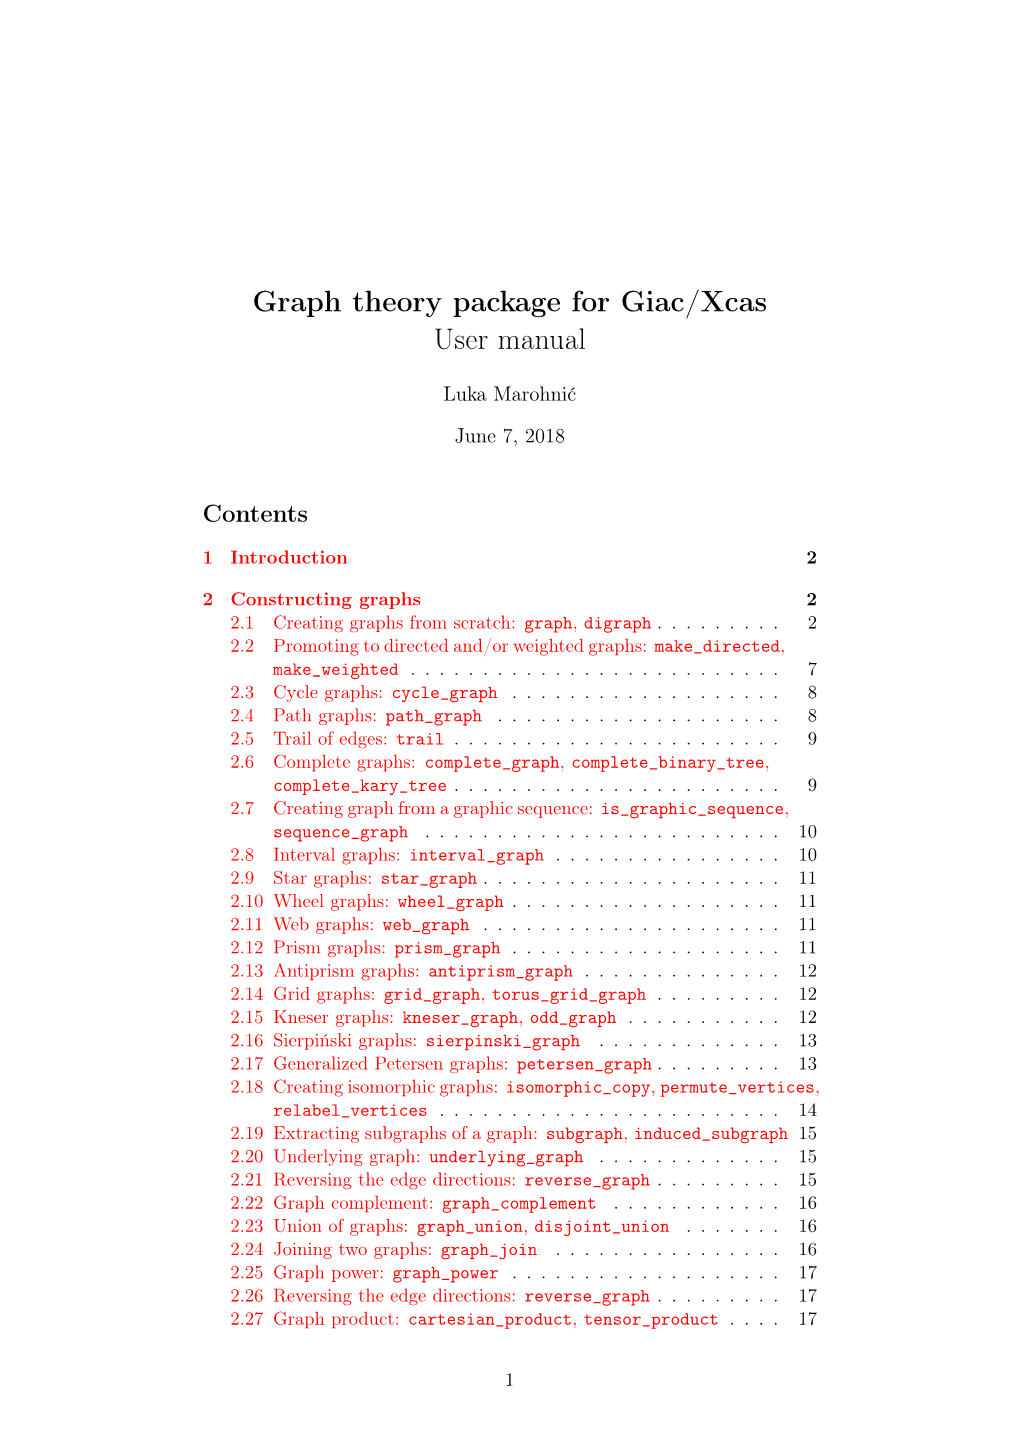 Graph Theory Package for Giac/Xcas User Manual